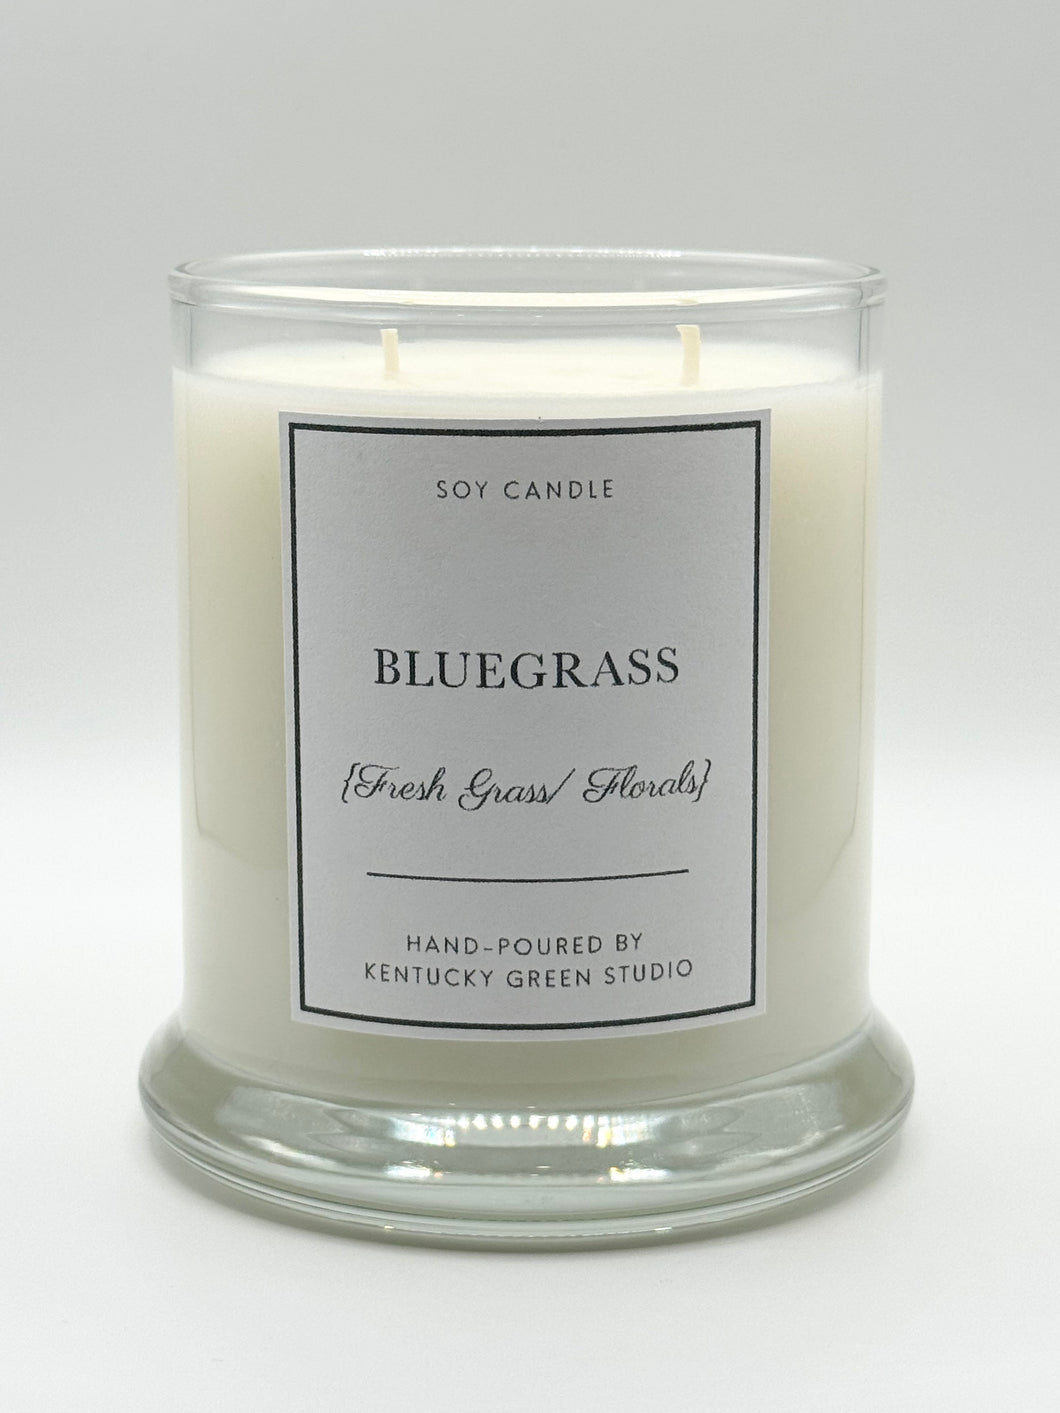 Bluegrass Soy Candle